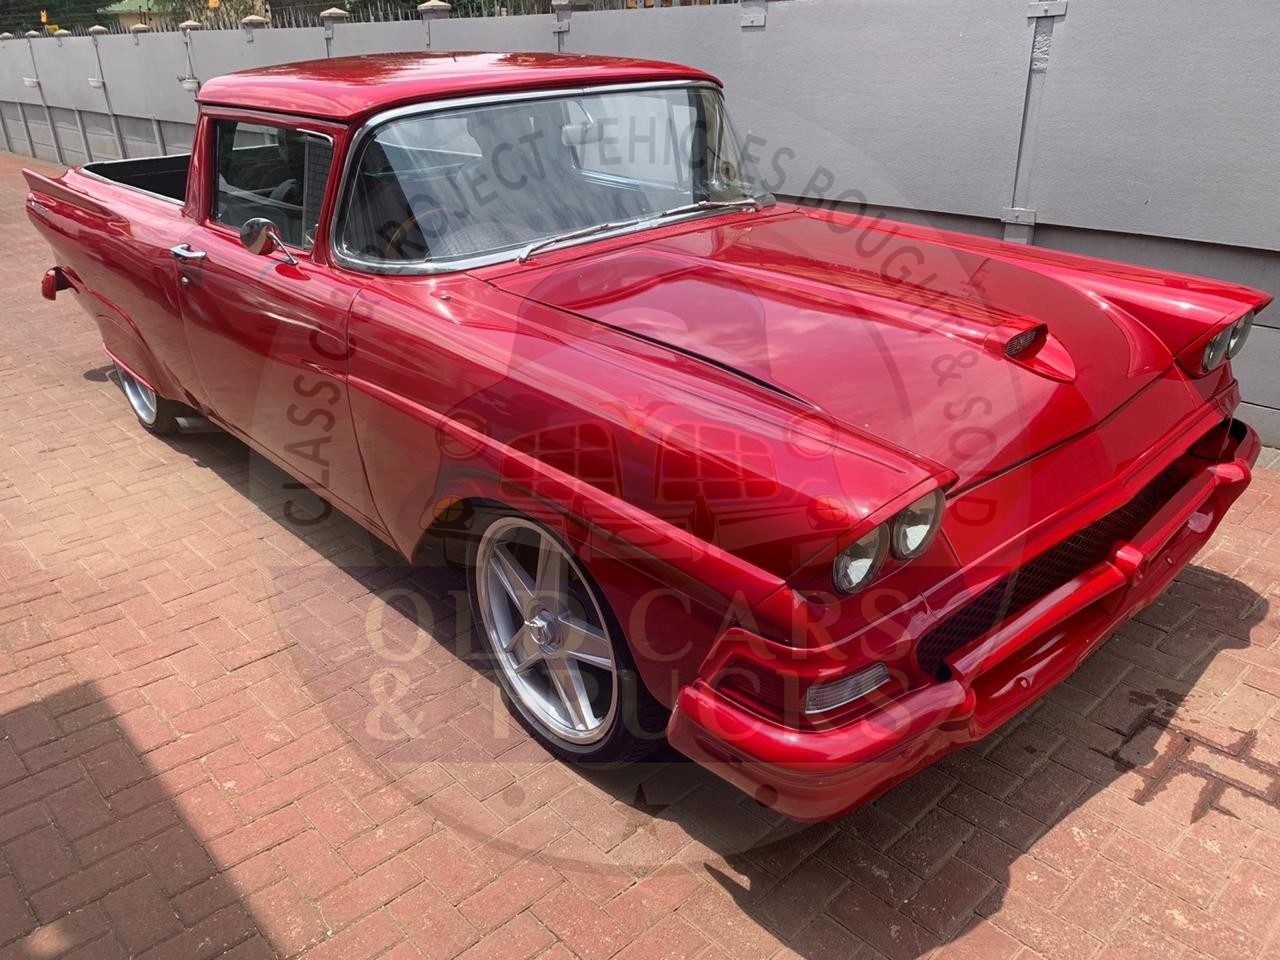 We buy and Sell Classics , vintage and project vehicles all over South Africa.